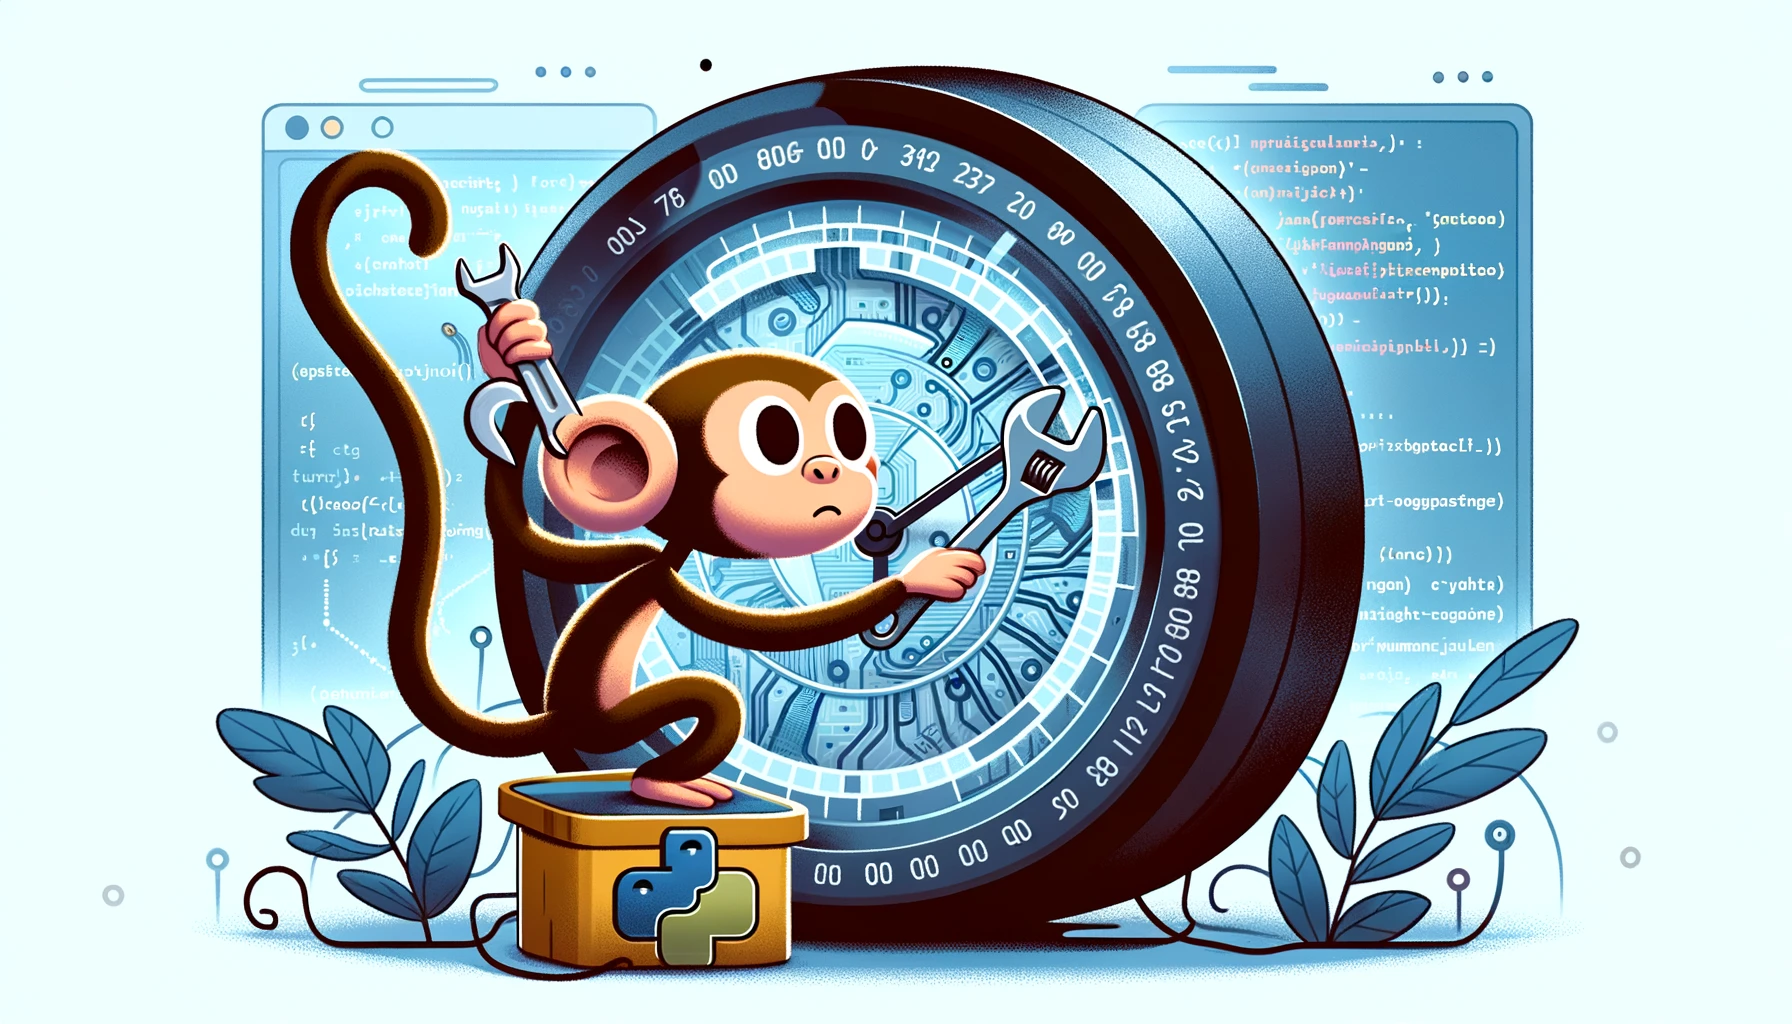 Monkey Patching and its consequences